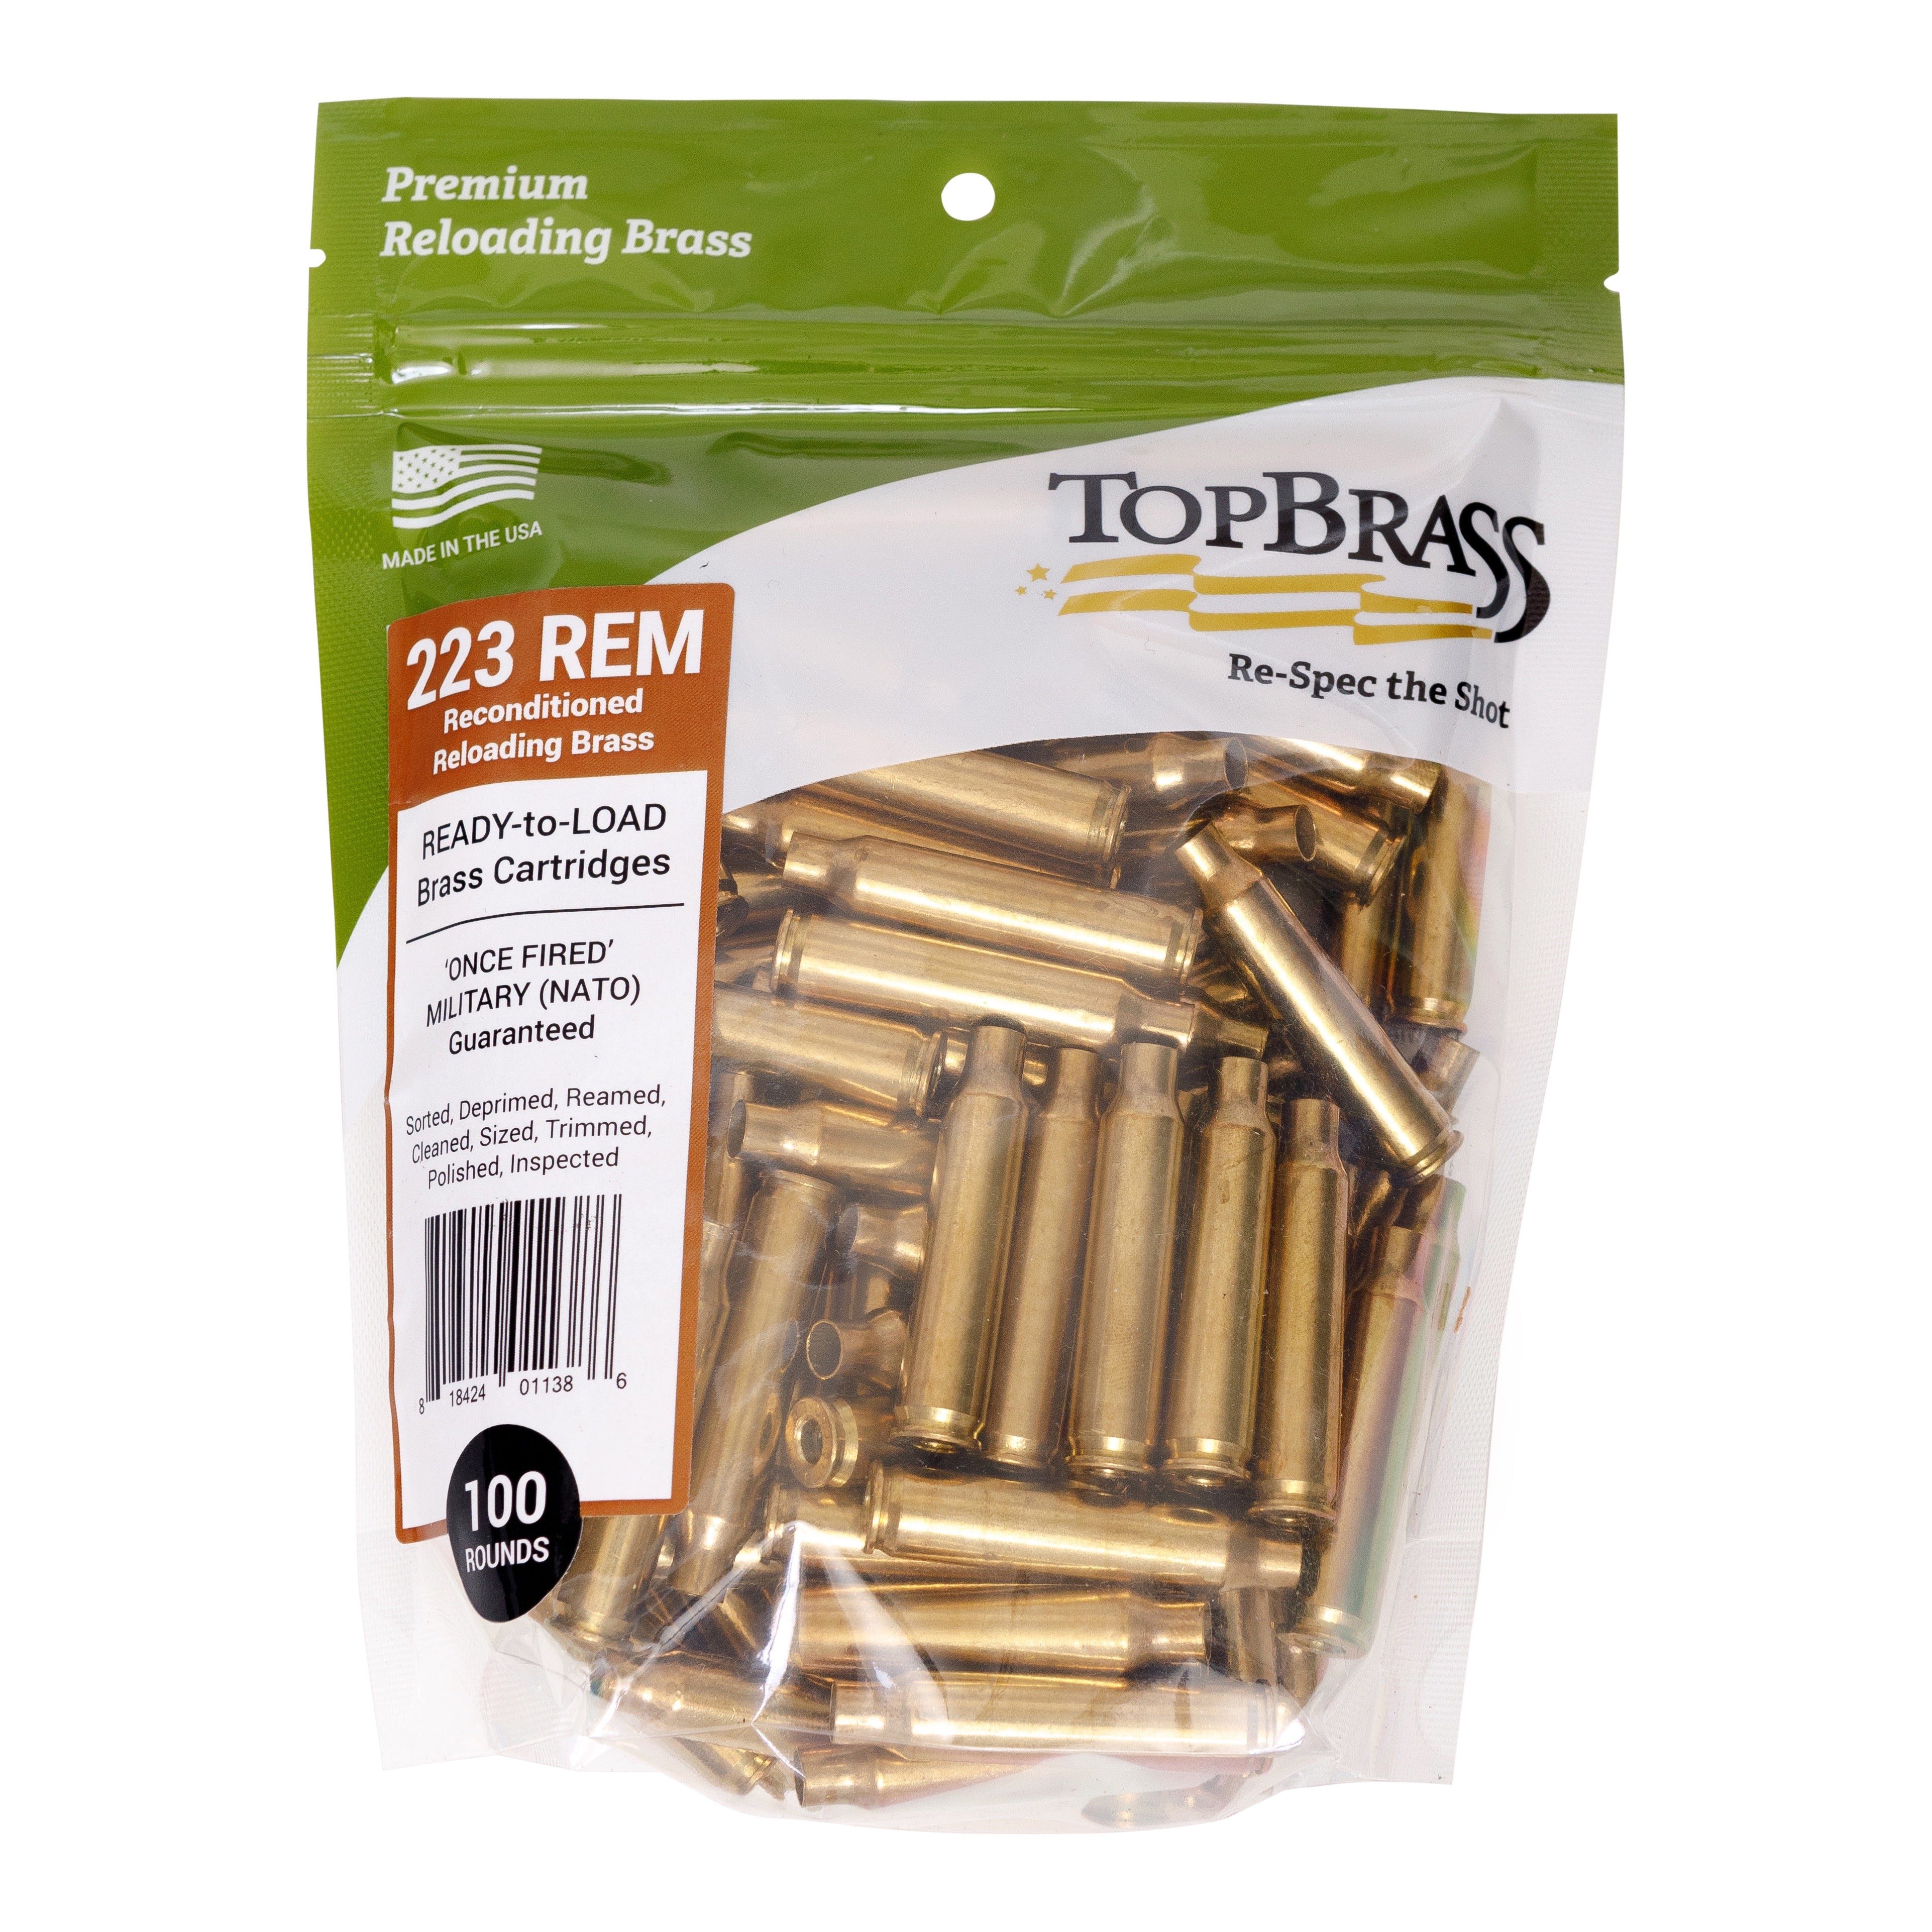 Reloading Brass and Supplies for sale and trade